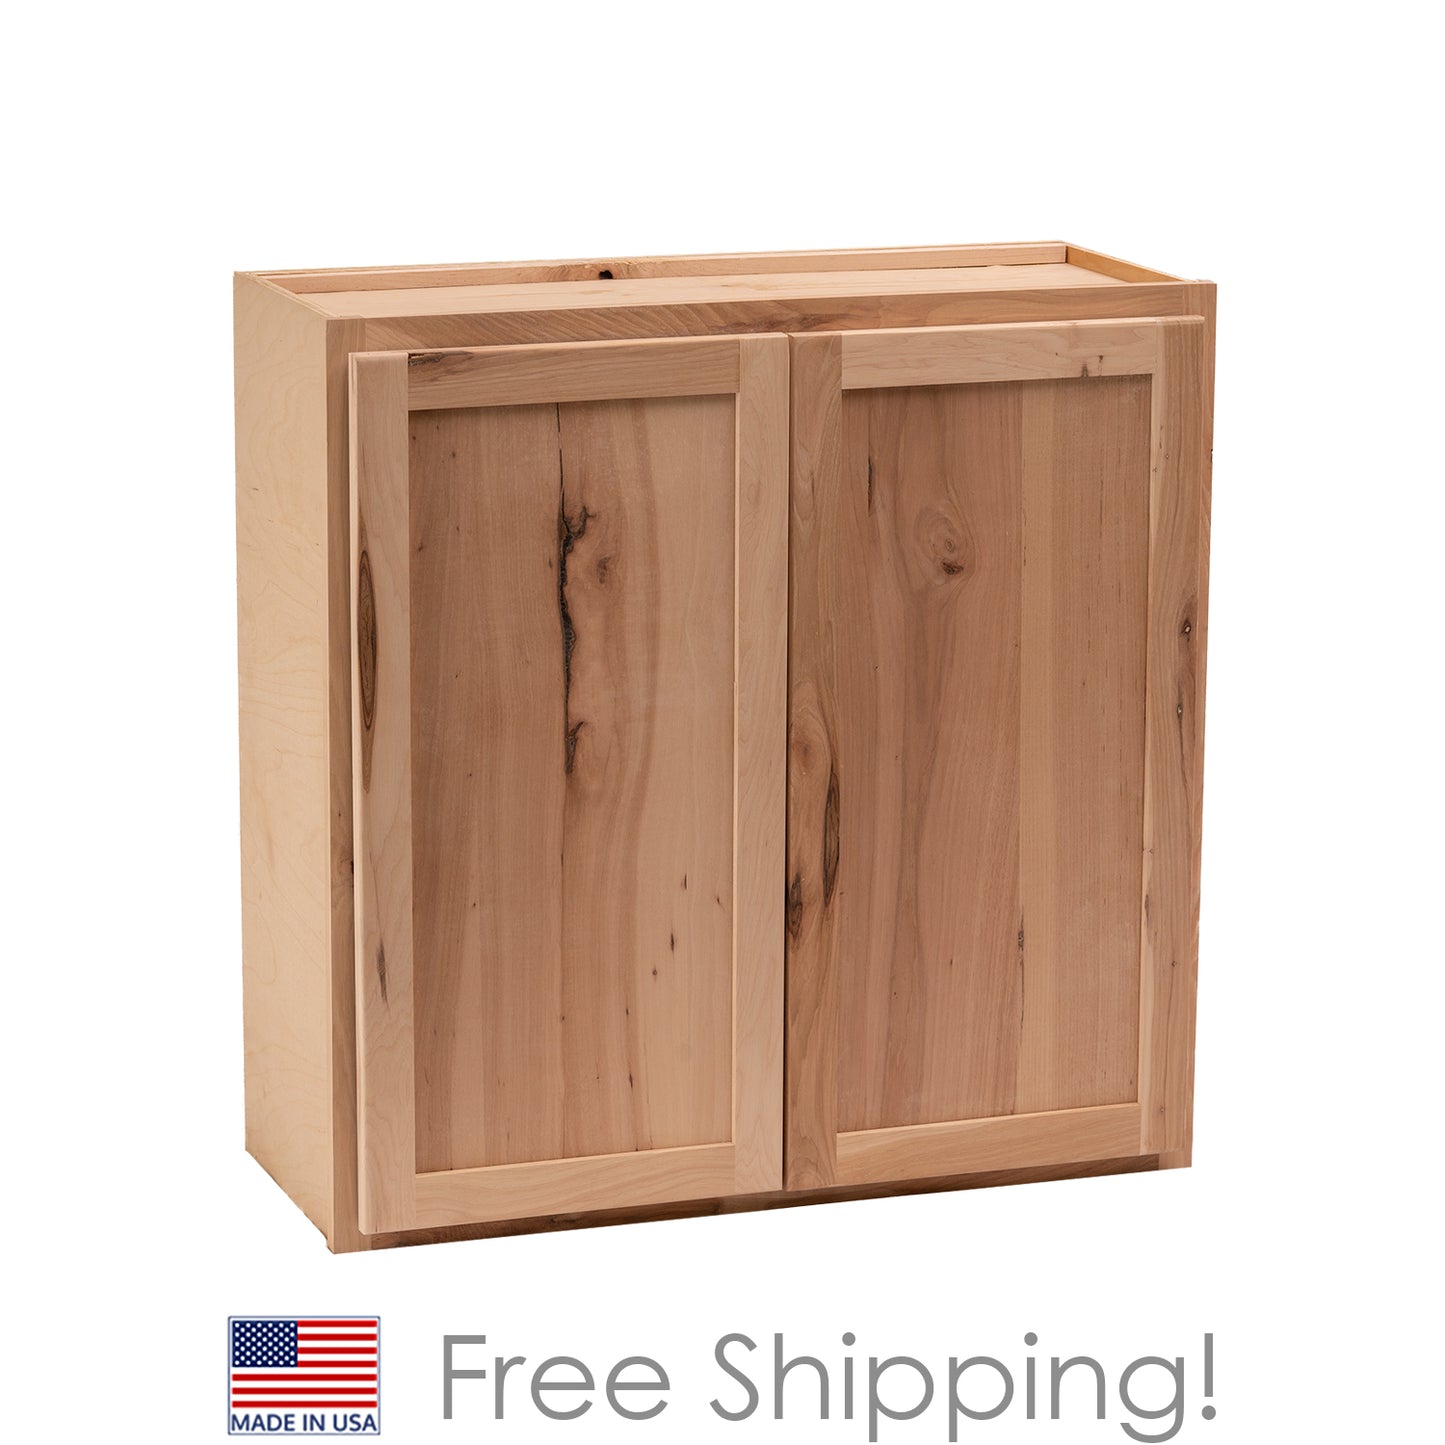 Quicklock RTA - Winding River Collection - Raw Hickory 36"Wx30"Hx12"D Wall Cabinet